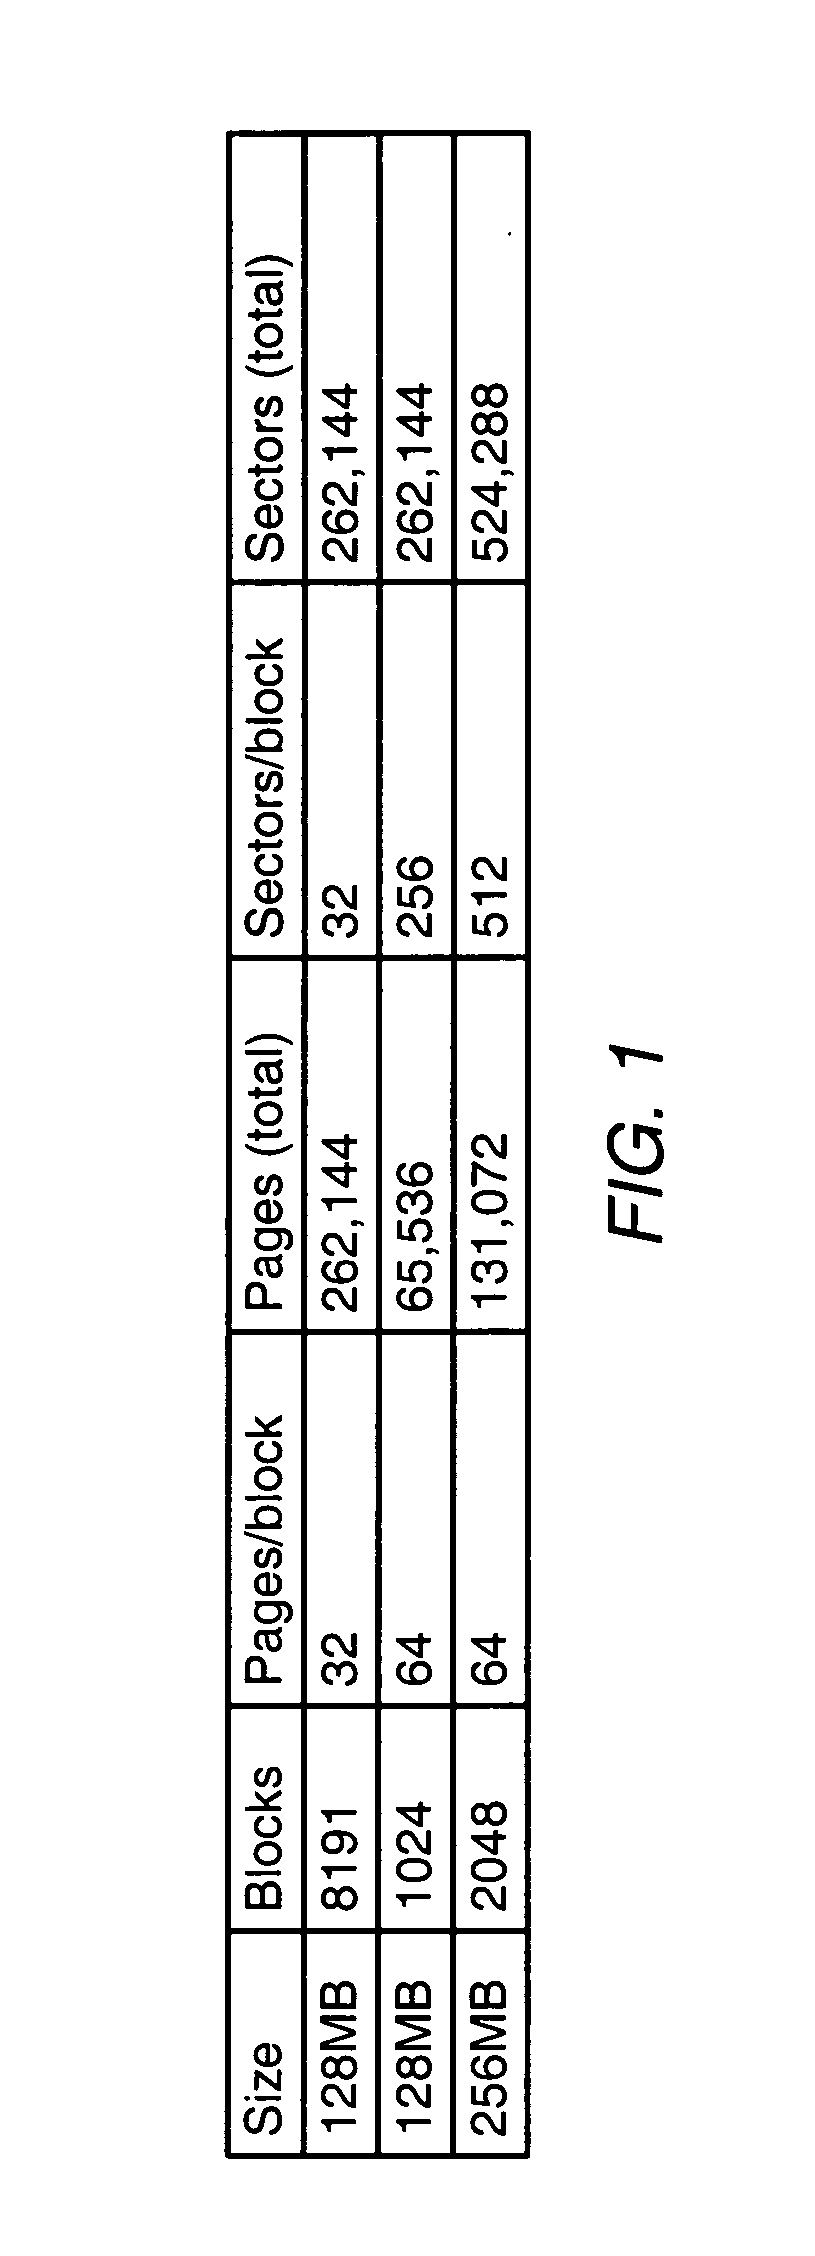 Method for fast access to flash-memory media